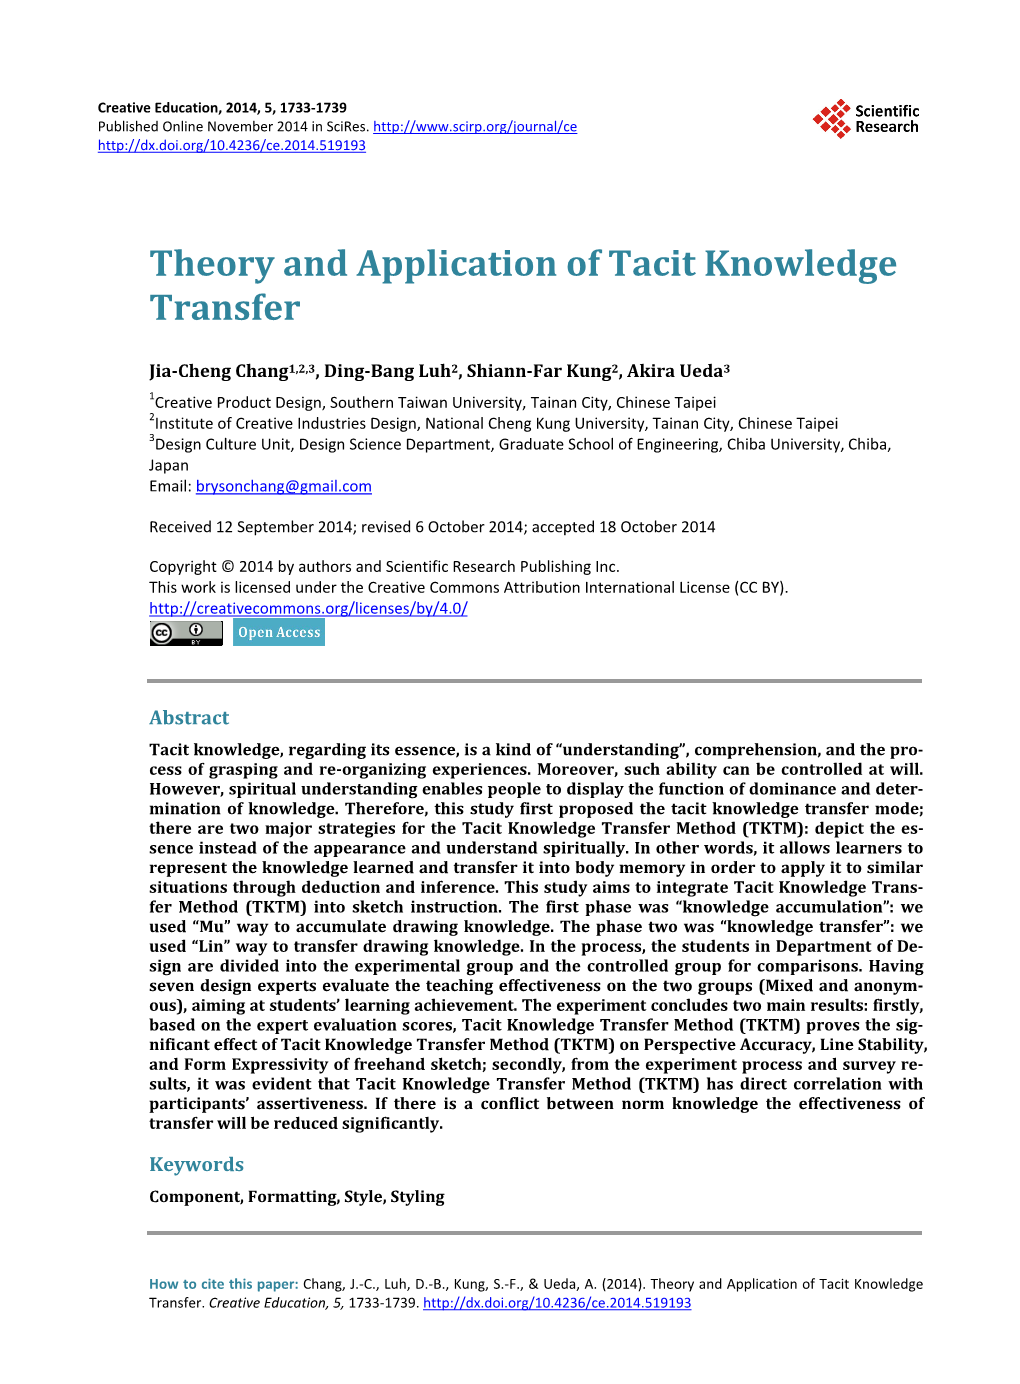 Theory and Application of Tacit Knowledge Transfer